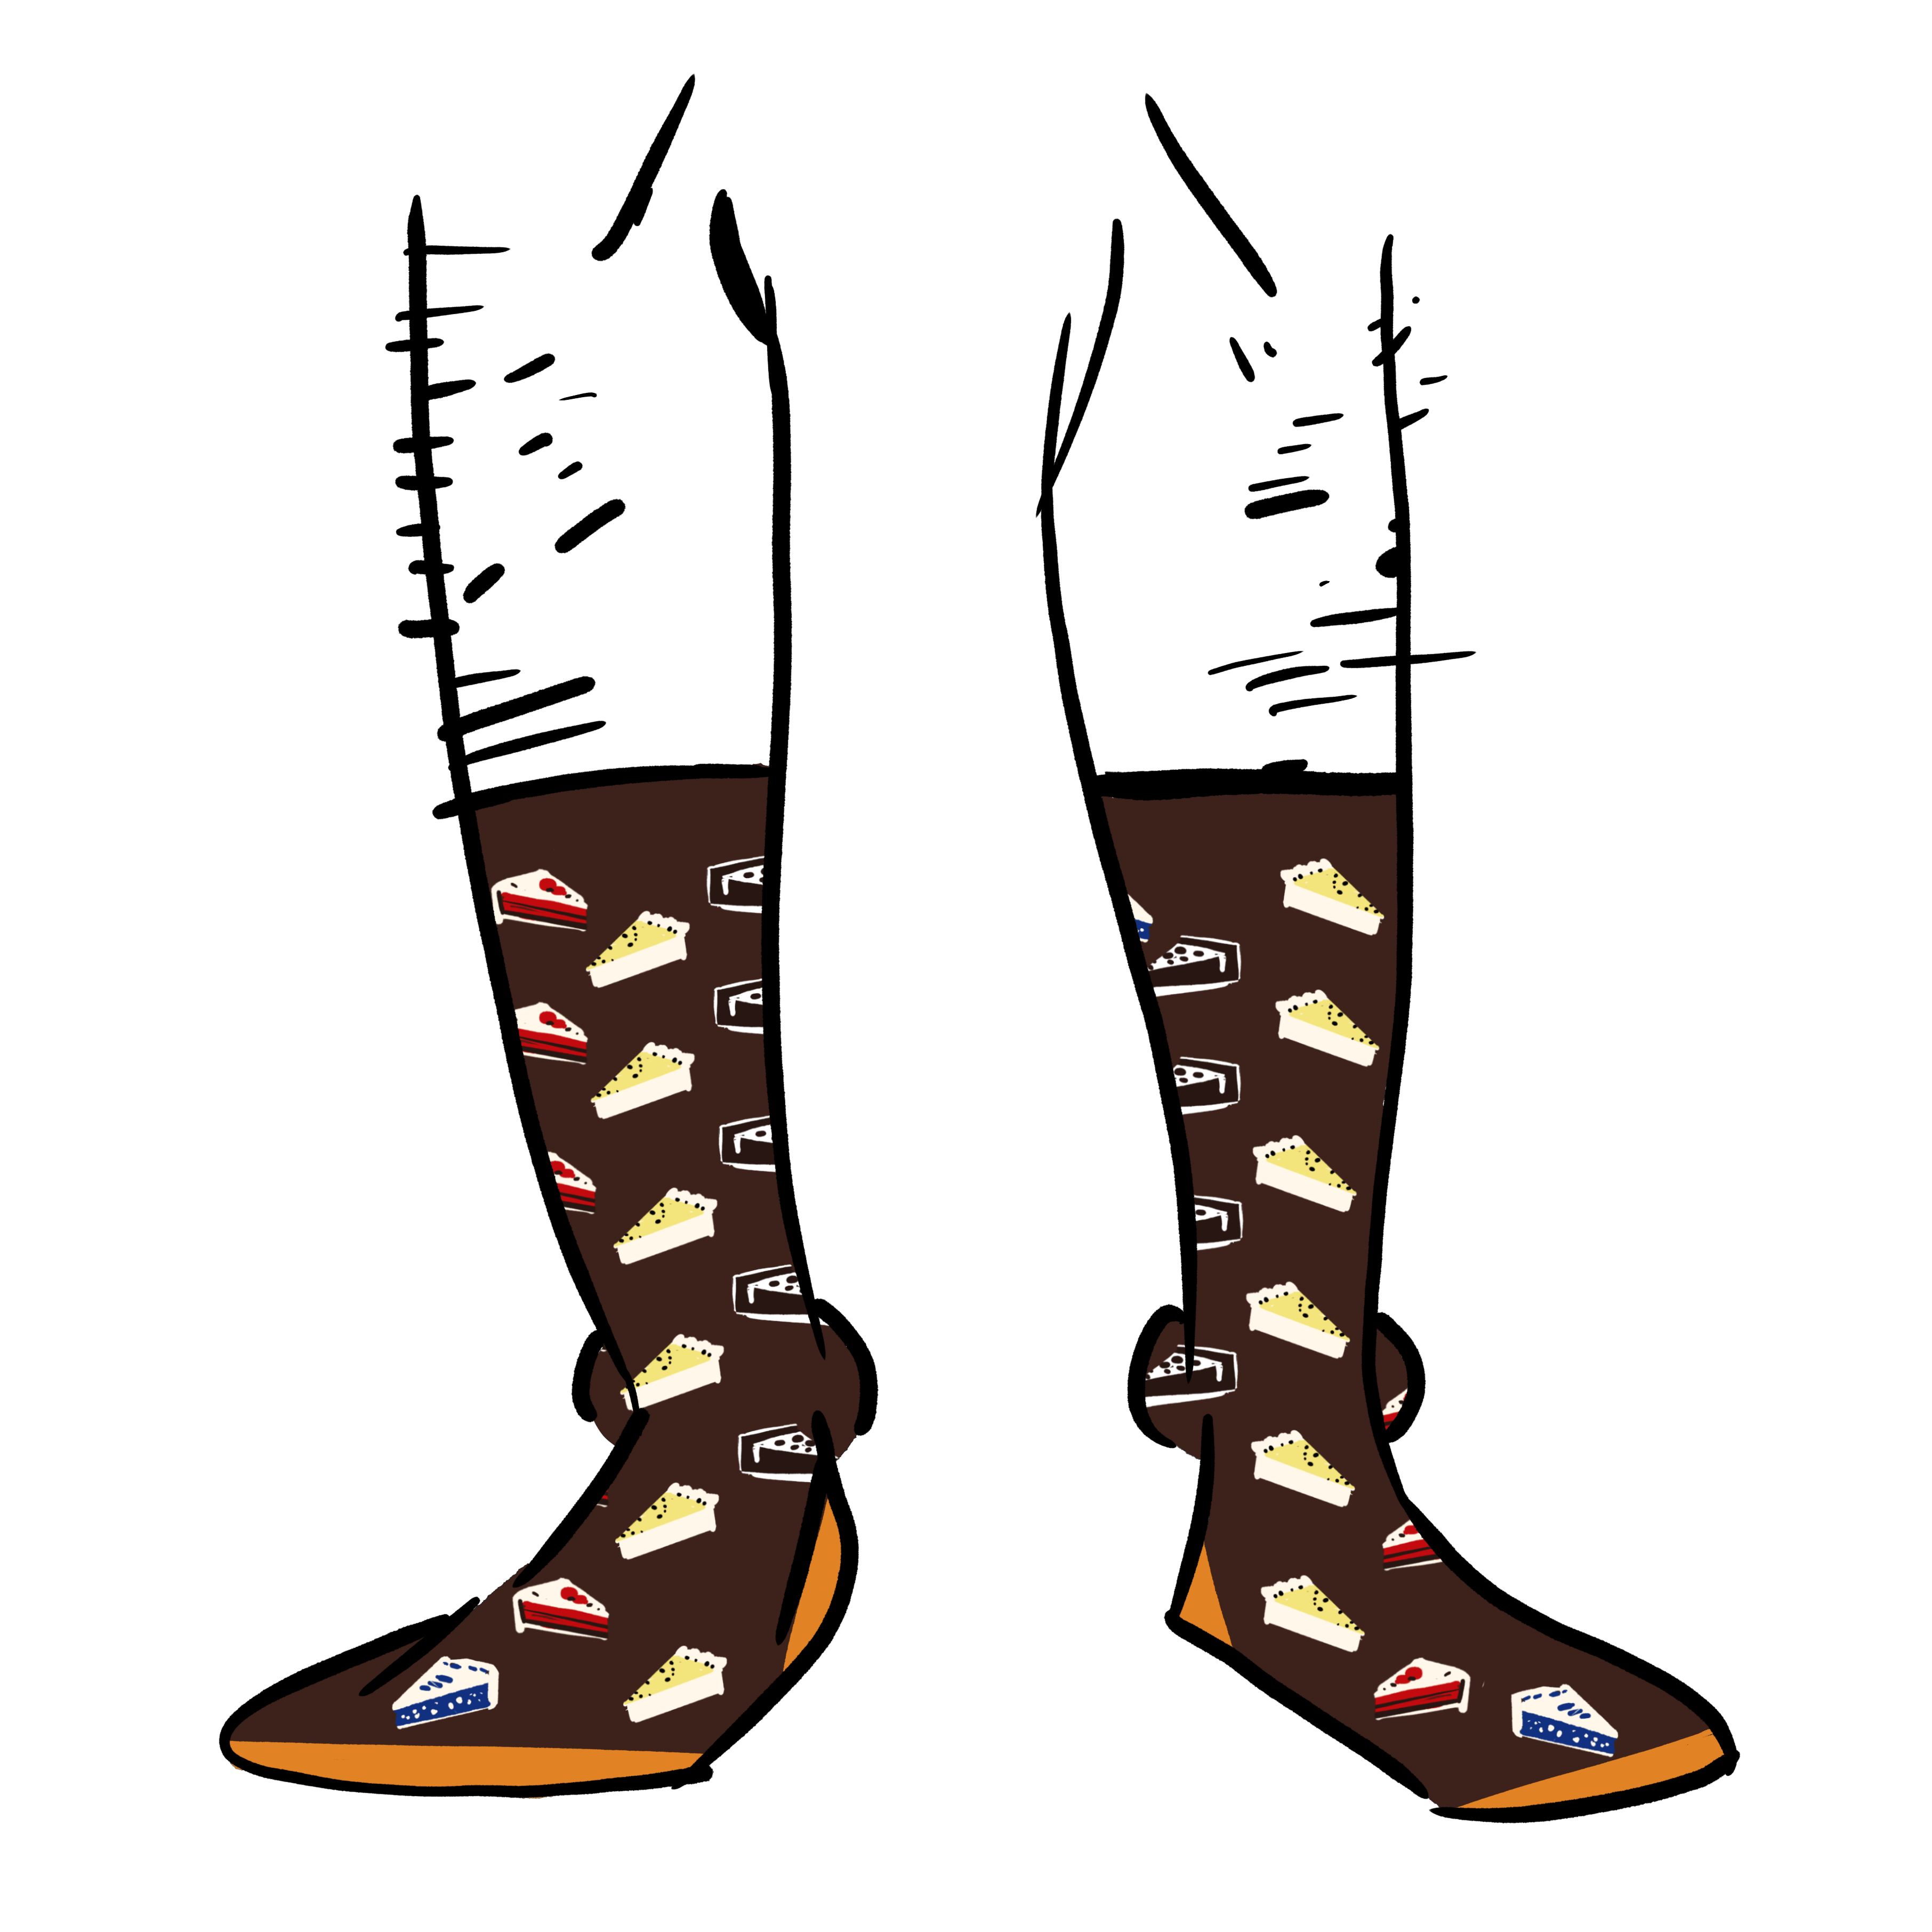 Brown socks with illustrations of slices of pie on them.